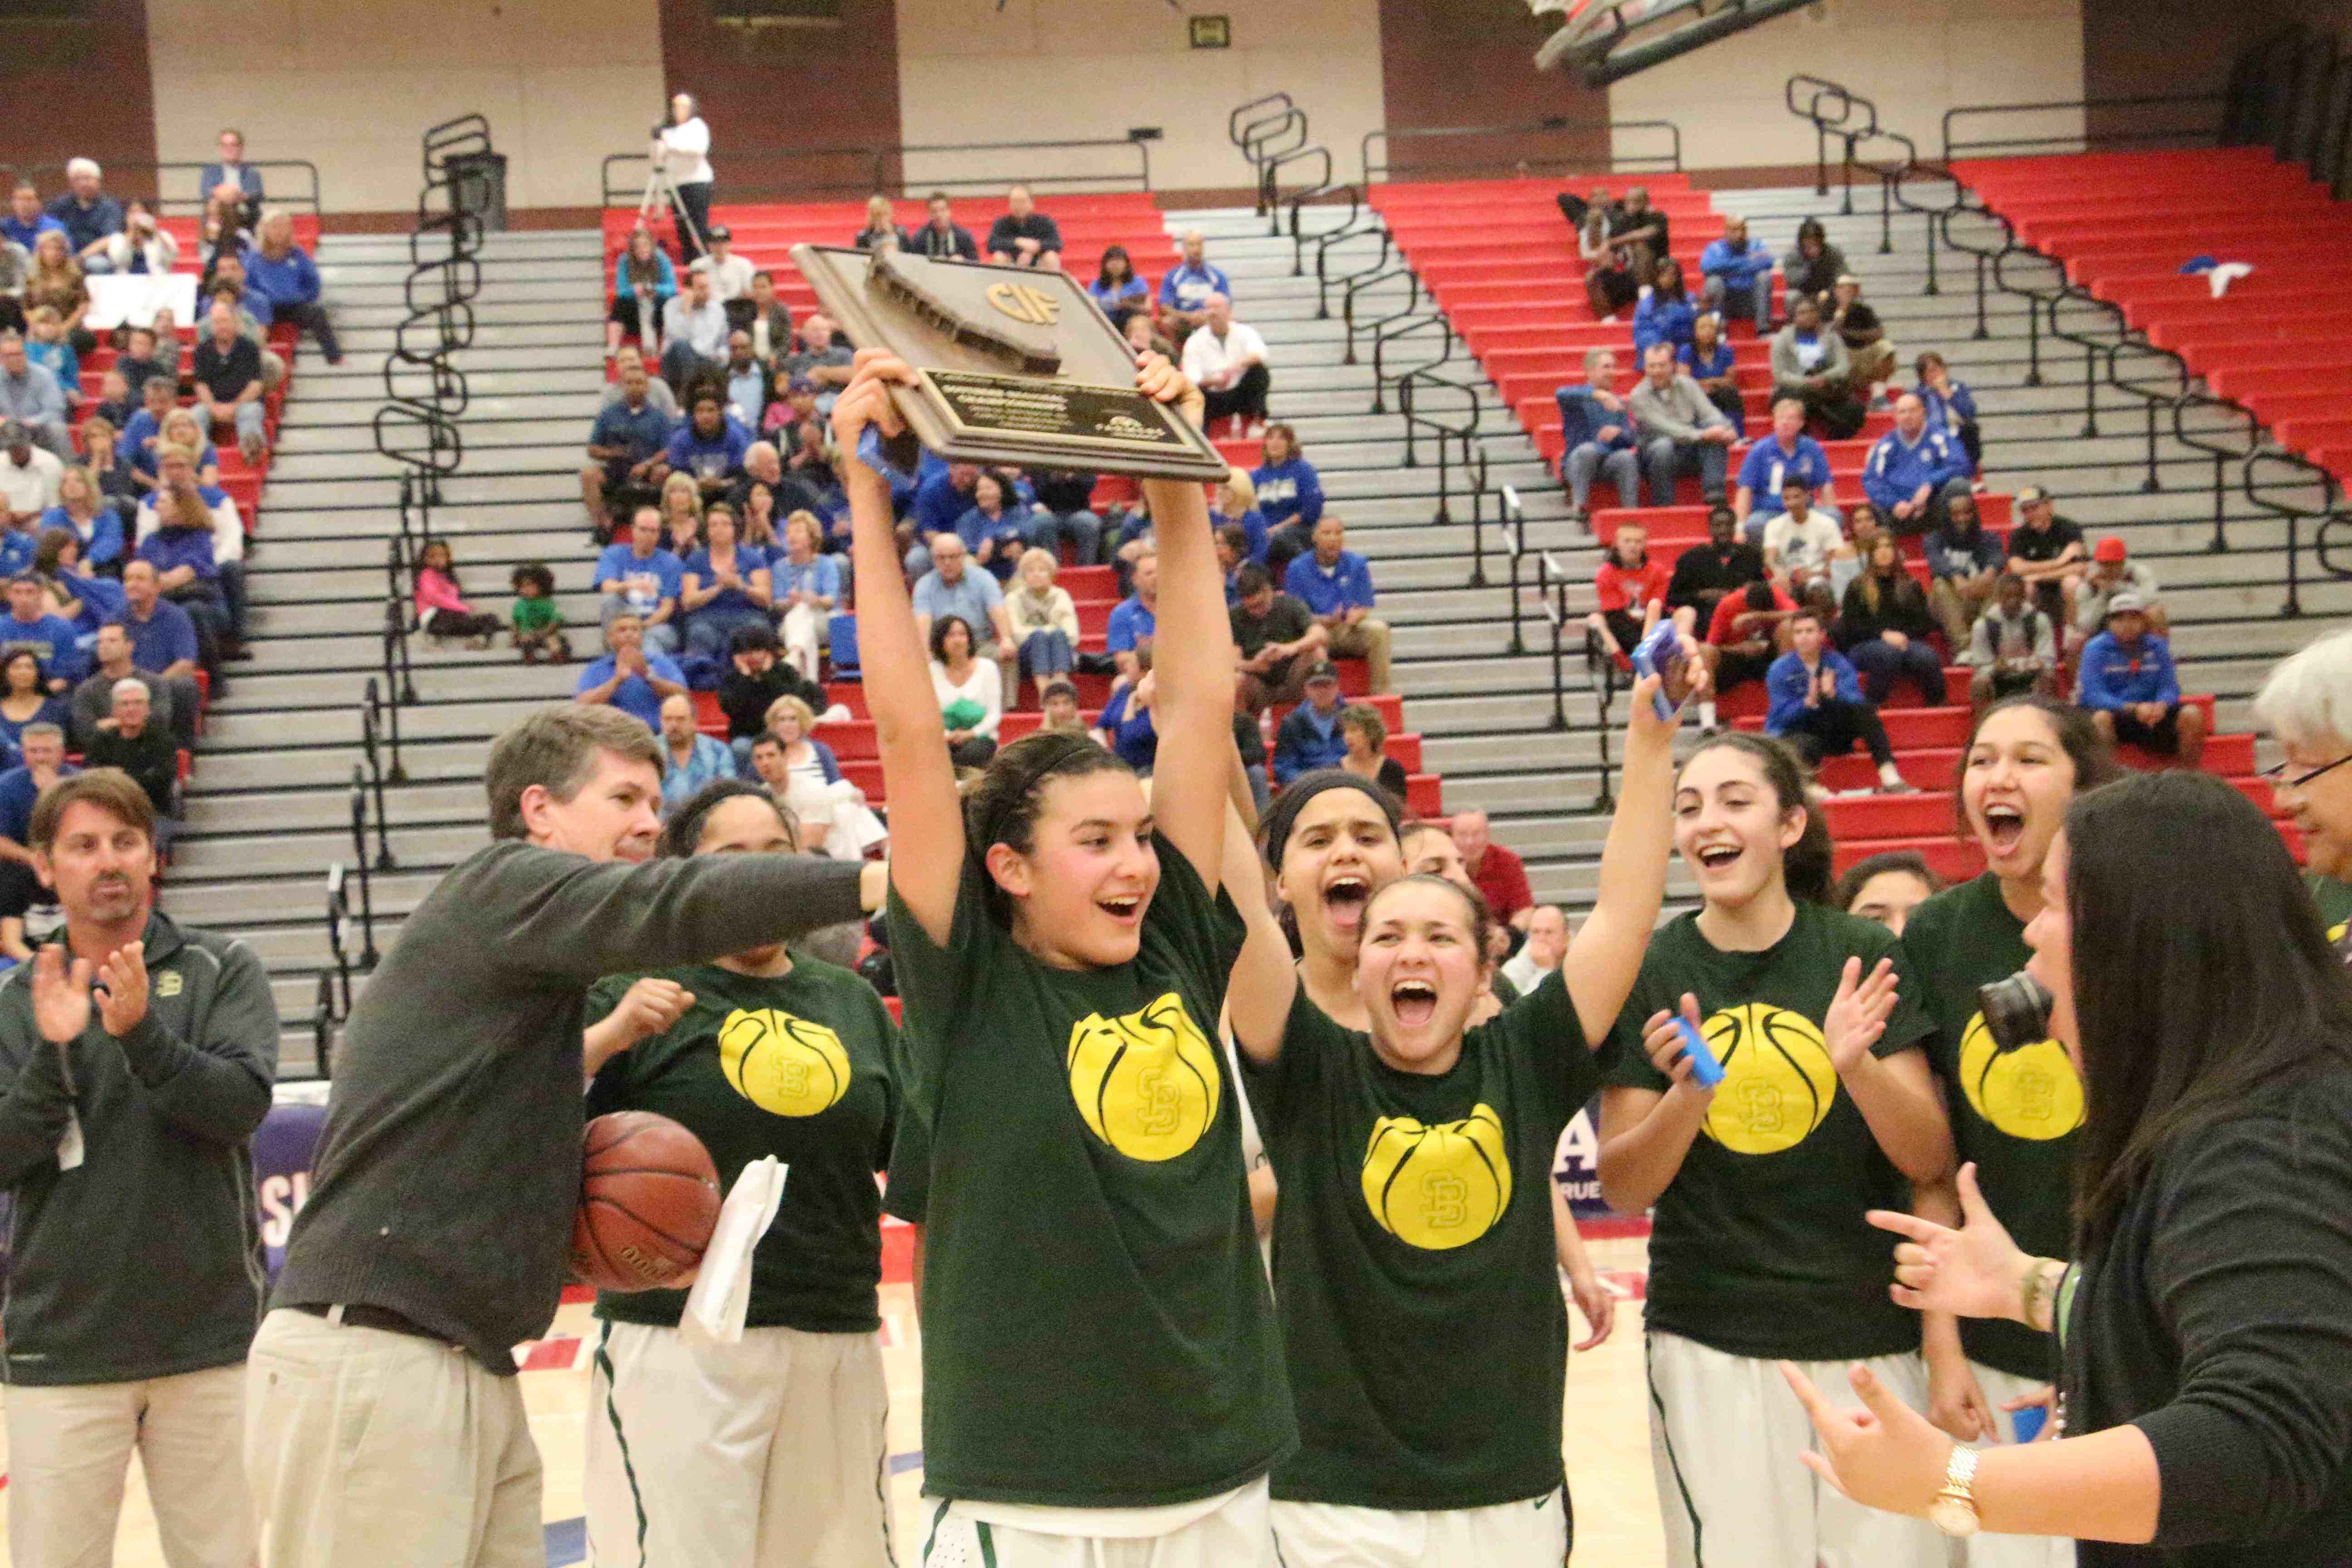 Amber Melgoza holds up the CIF Regional title plaque as her  Santa Barbara teammates celebrate after beating Santa Margarita, 58-48, in the Division 3 regional final.